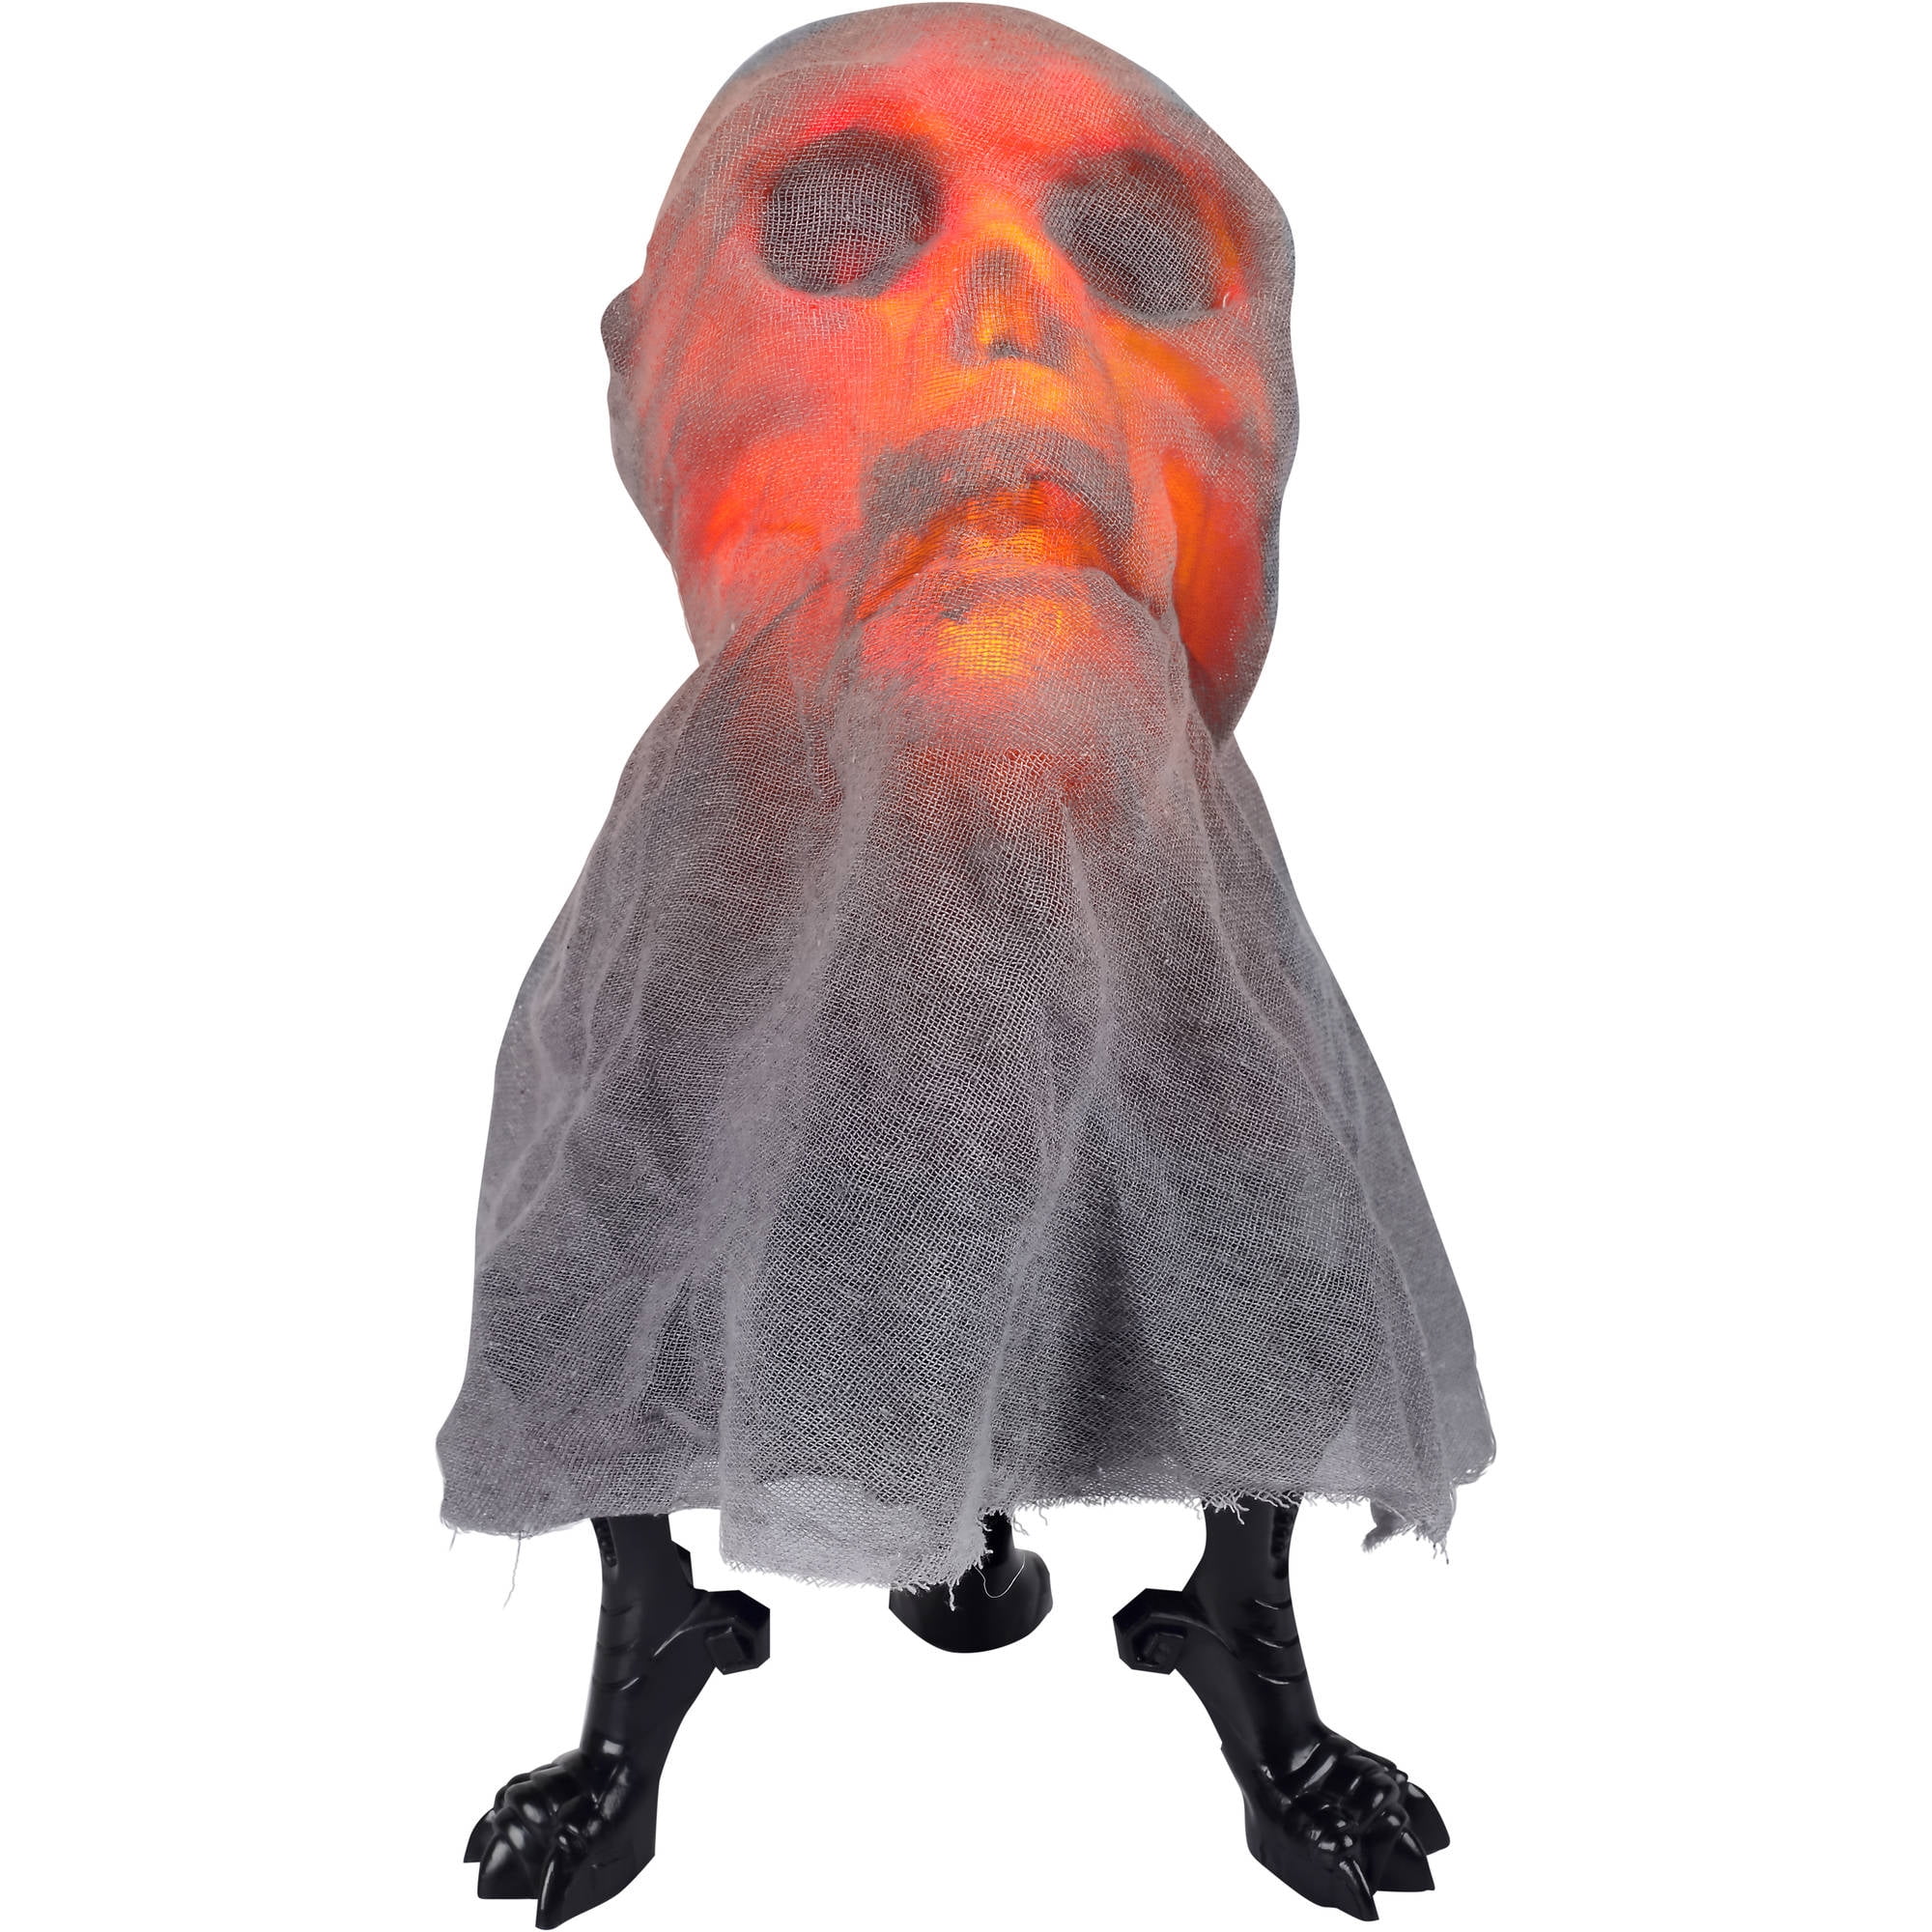 Animated Lightshow Tabletop Fire and Ice Skull Head Halloween ...